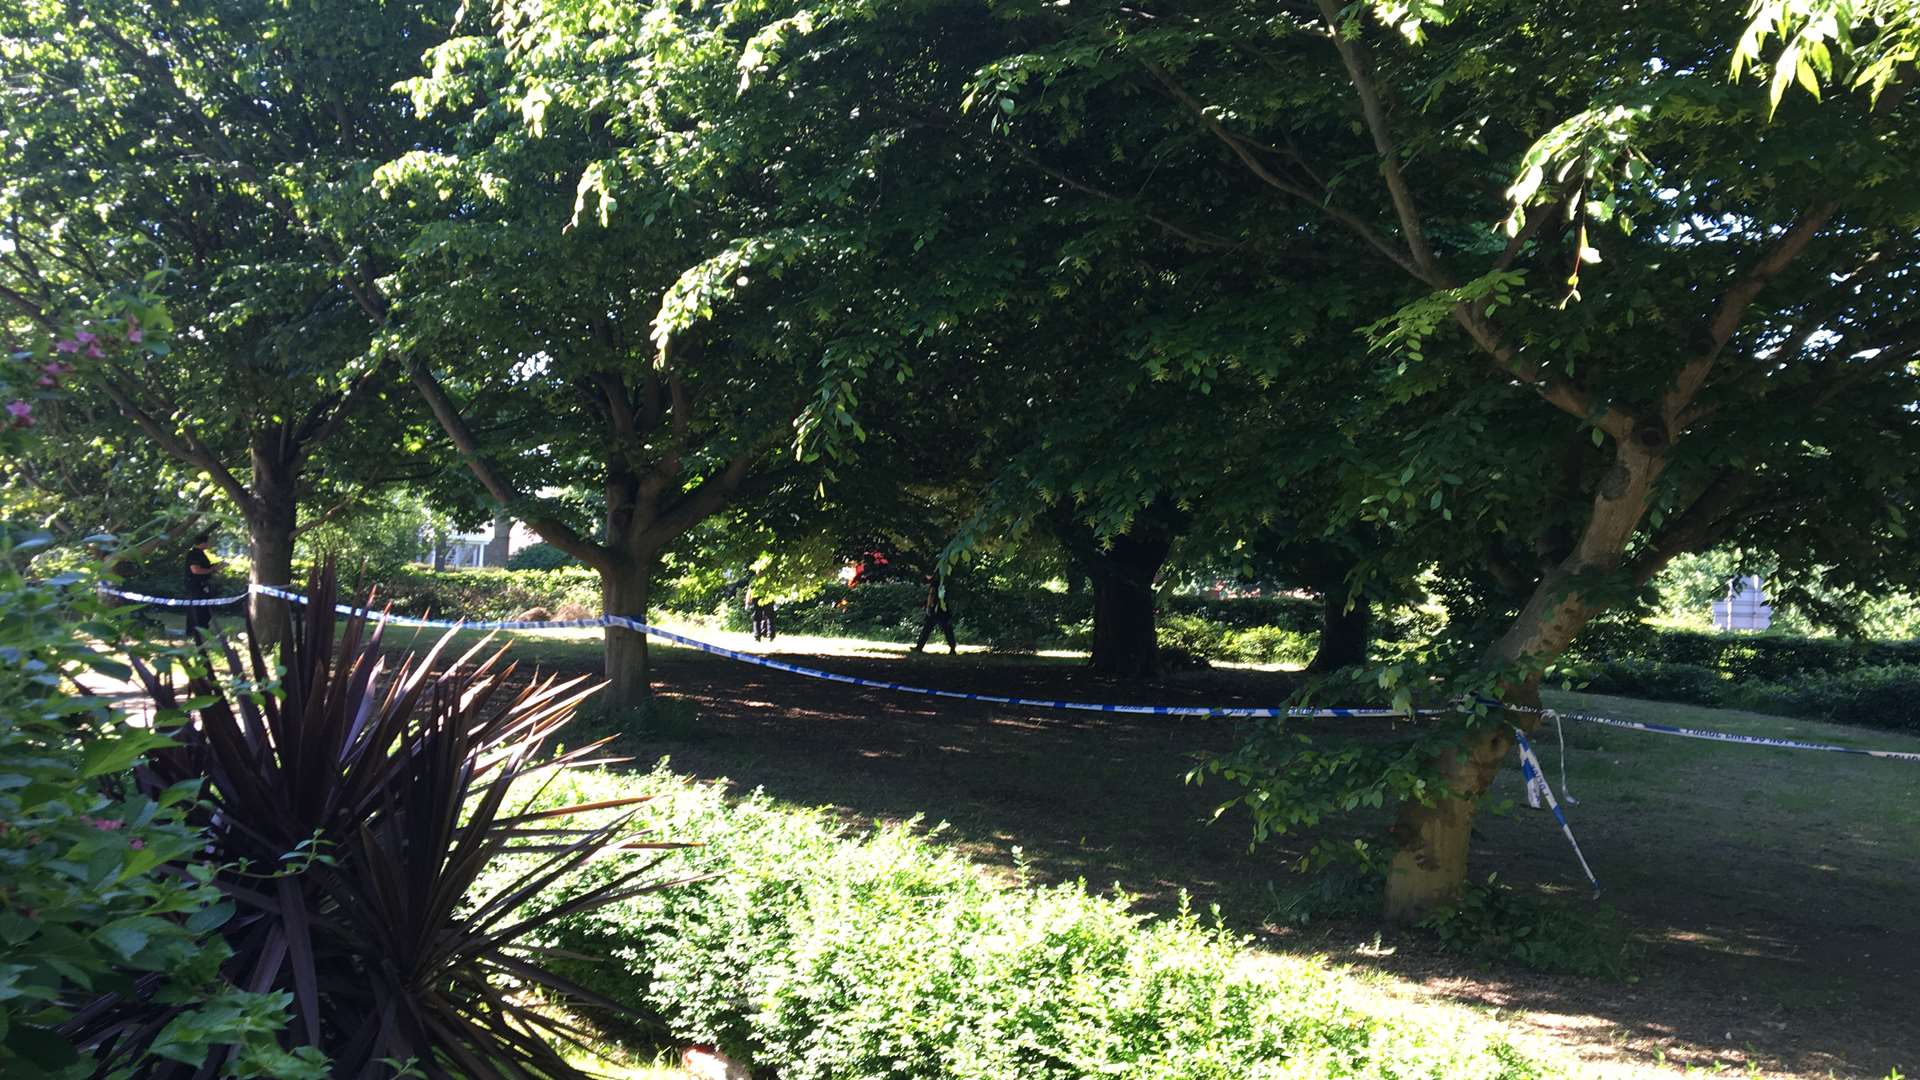 Police have taped off this area at Plumpton Walk